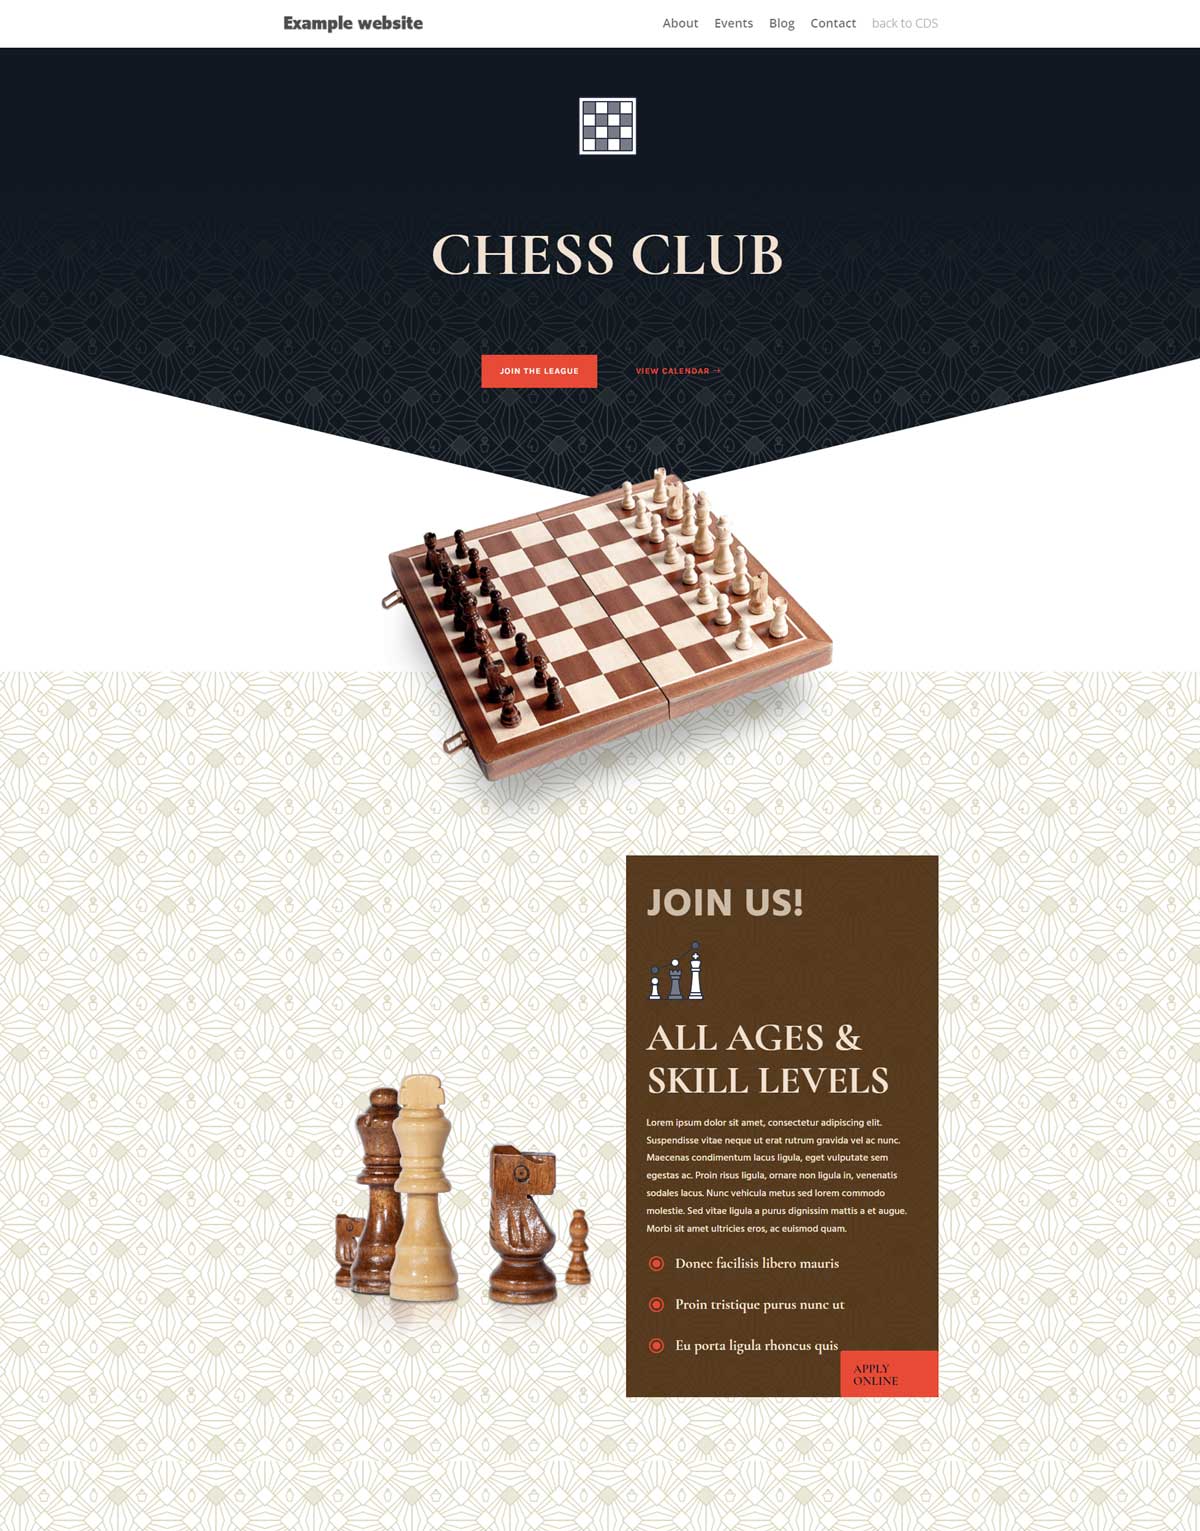 design of Chess-Club-website-example